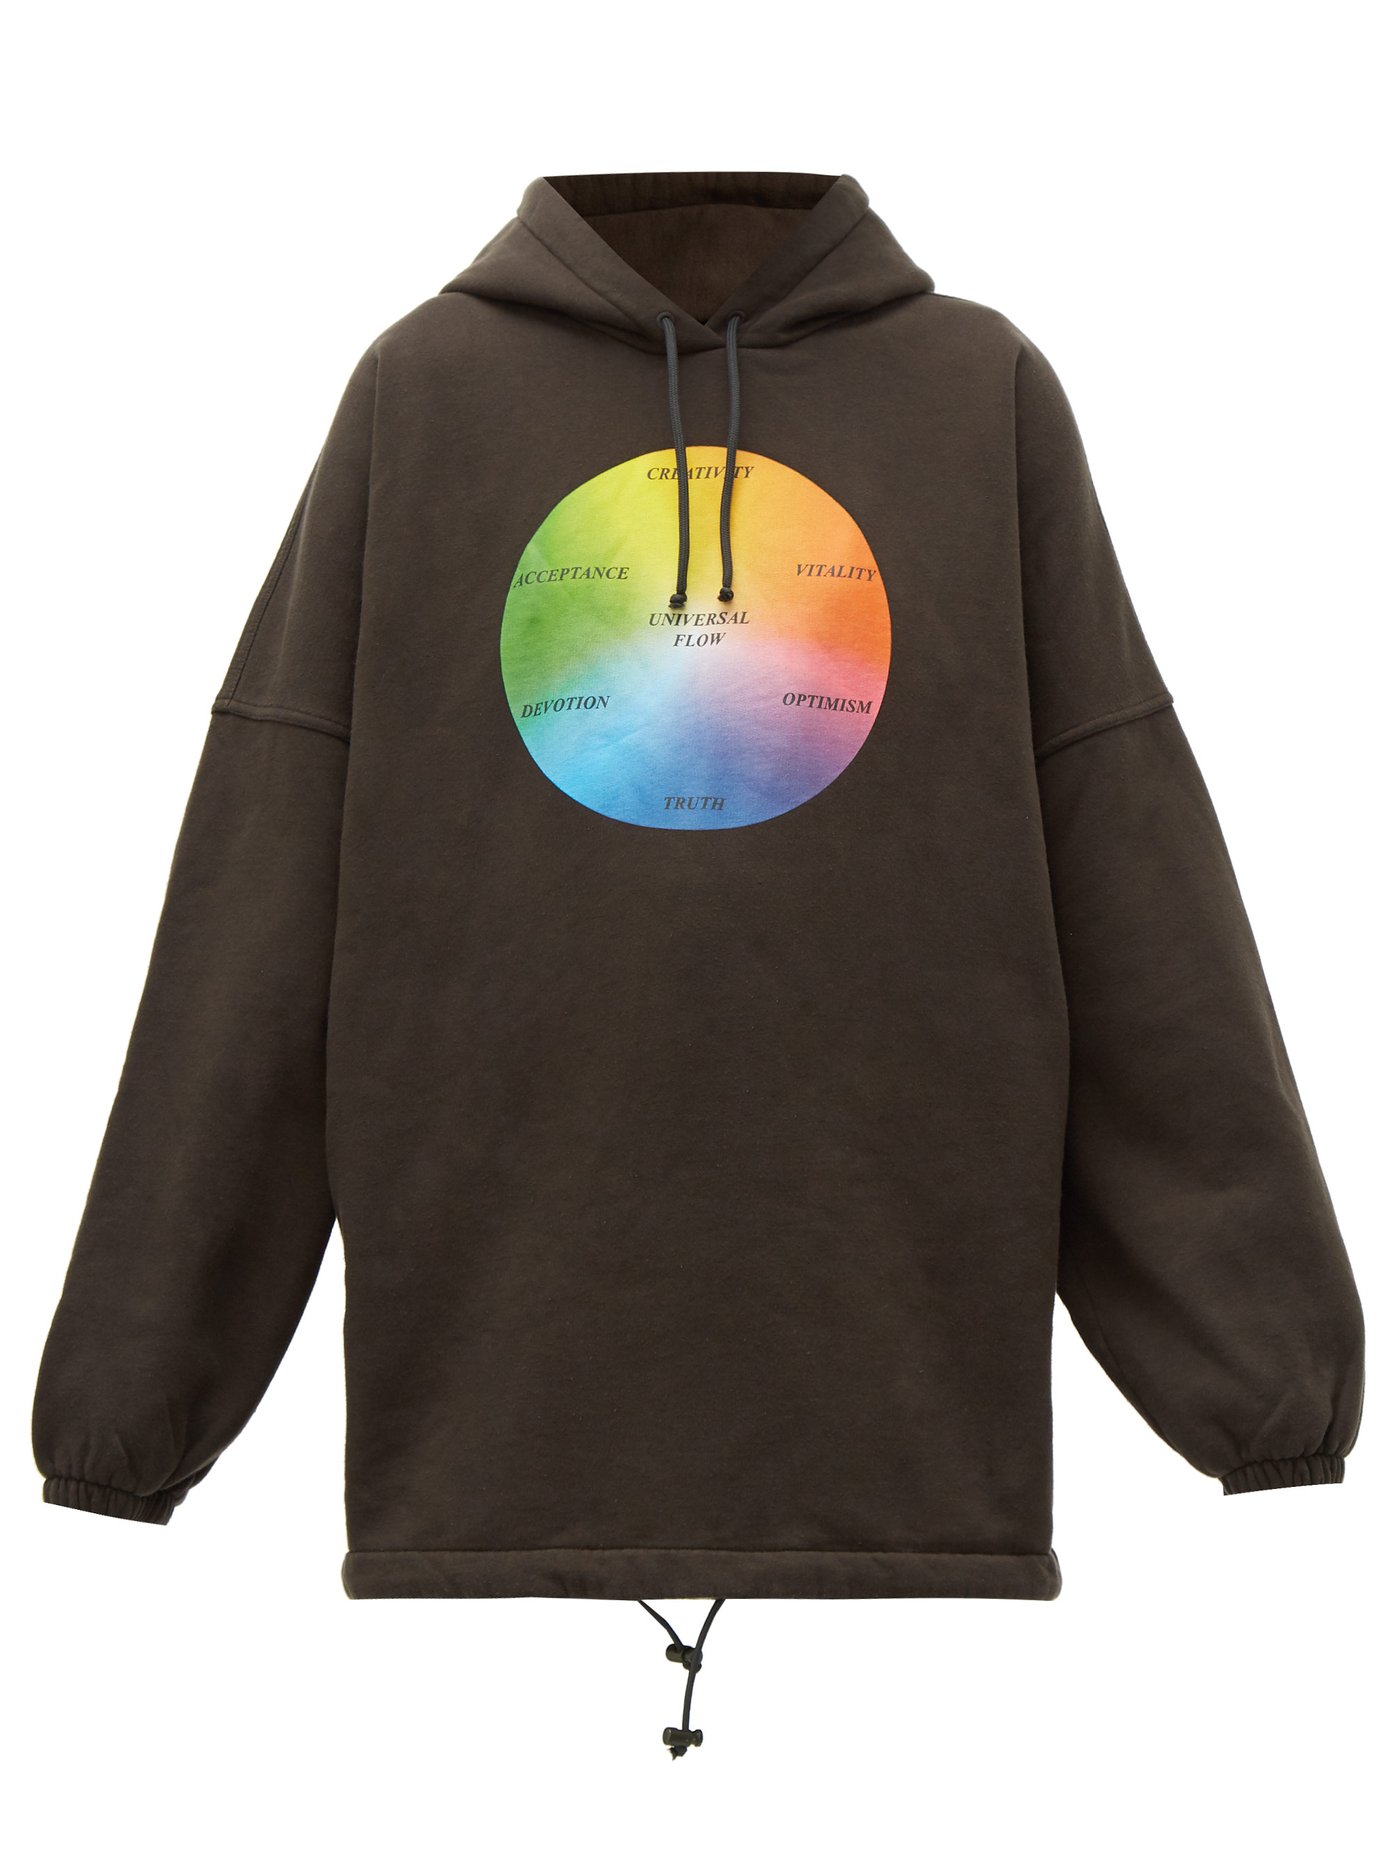 Universal Flow cotton-jersey hooded 